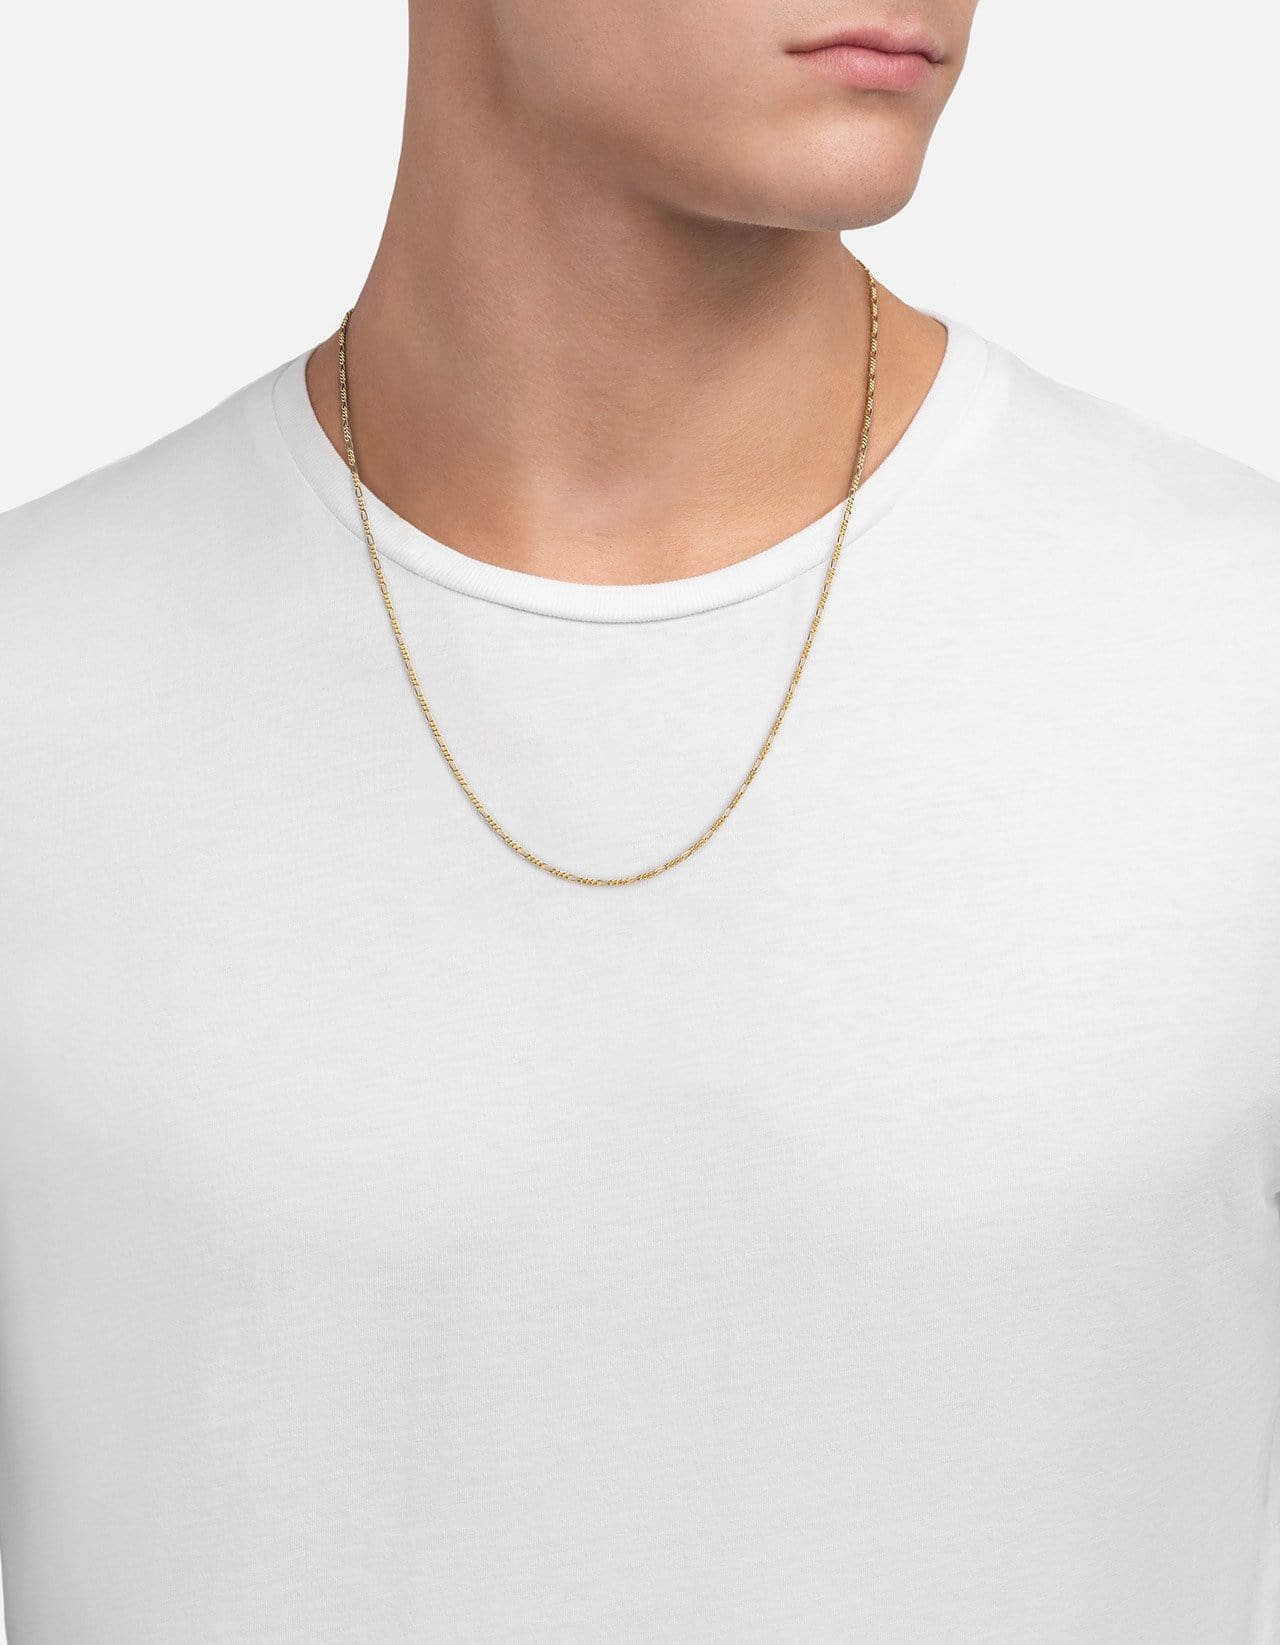 Gold Figaro Chain Necklace for Men Mens Jewellery 18kgold Italian Style  Figaro - Etsy